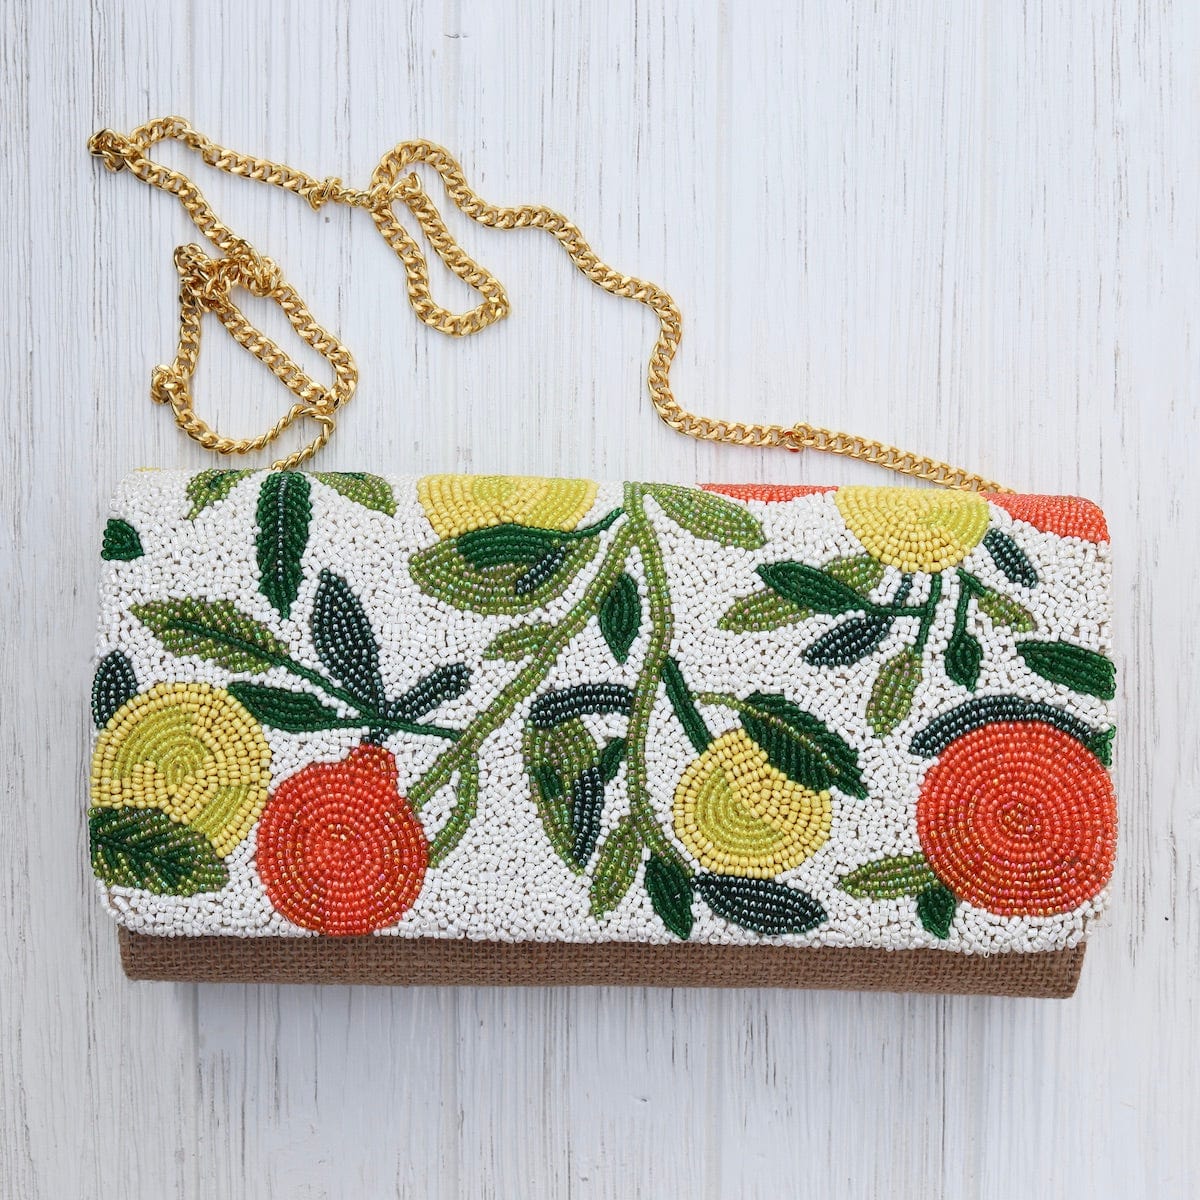 BAG Half Flap Natural Clutch in Beaded Ivory with Oranges and Lemons